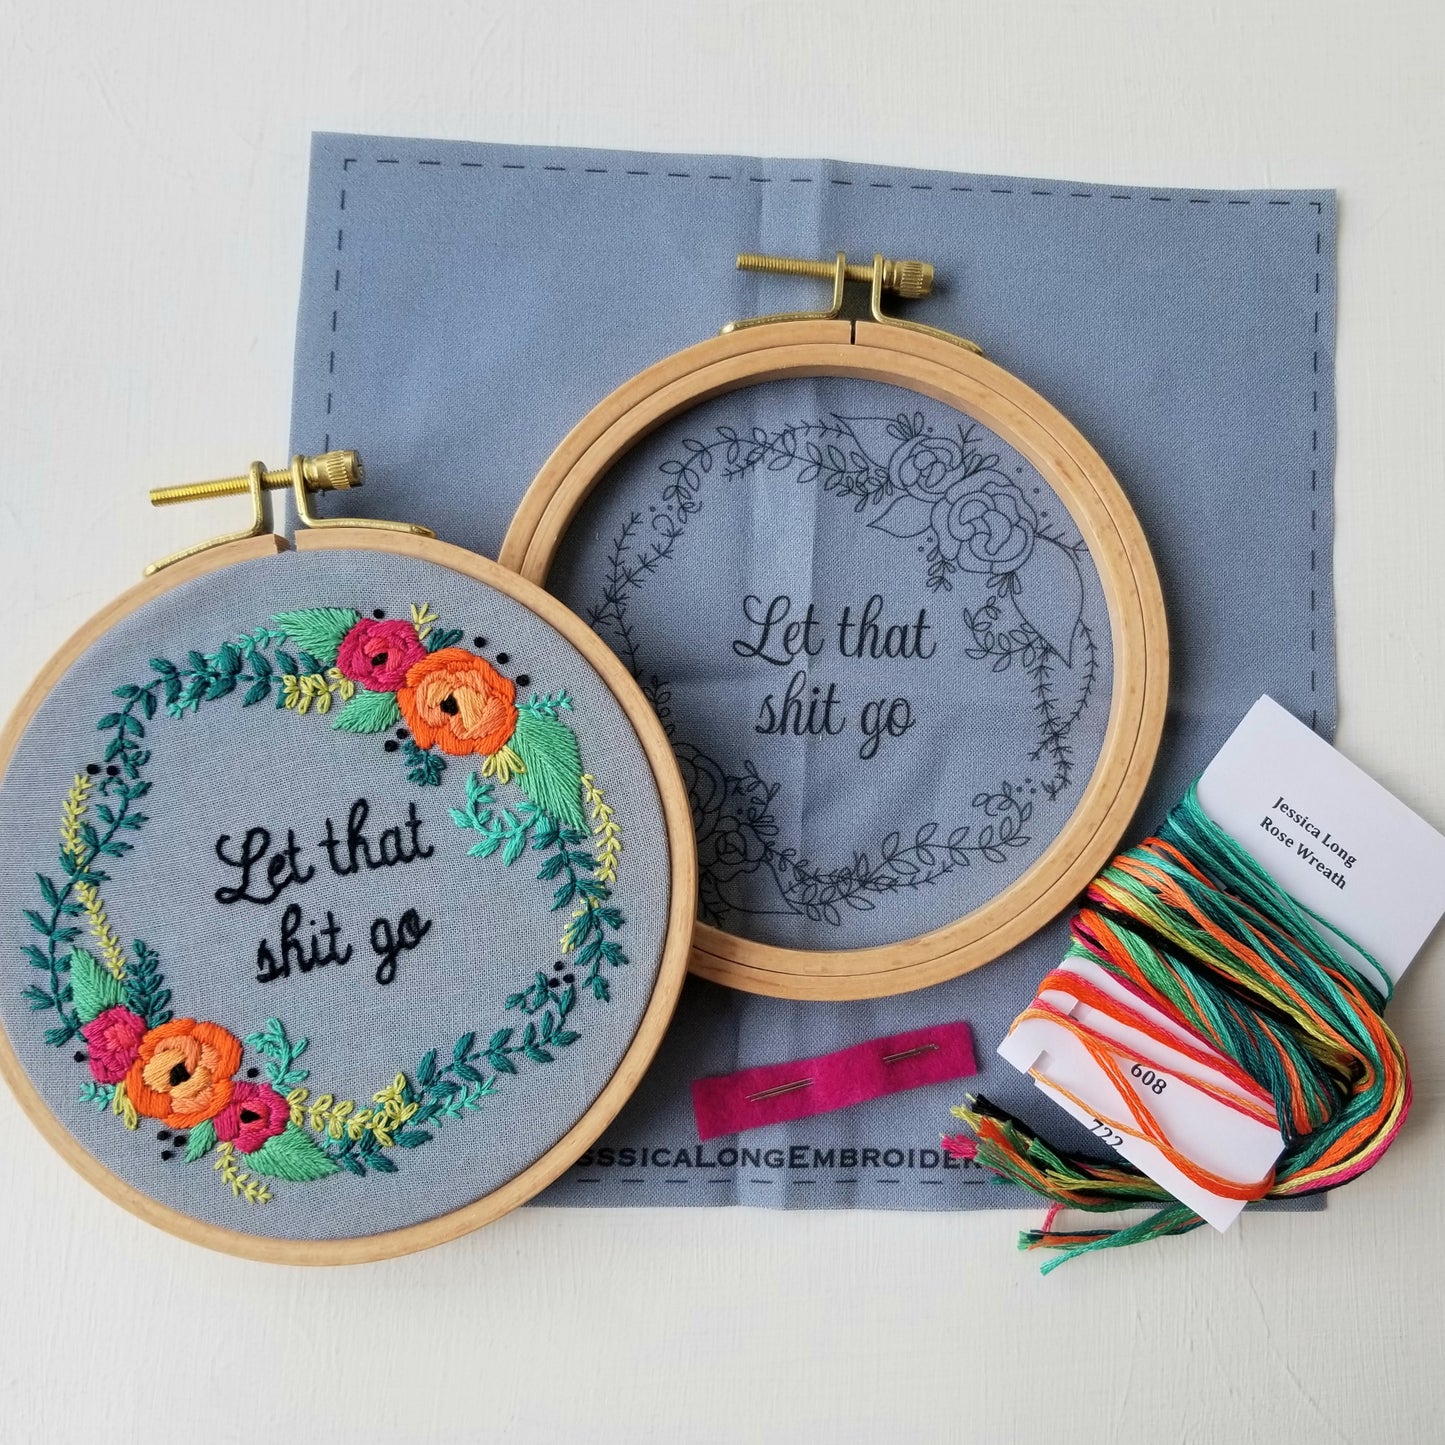 "Let that $h!t go" Embroidery Kit